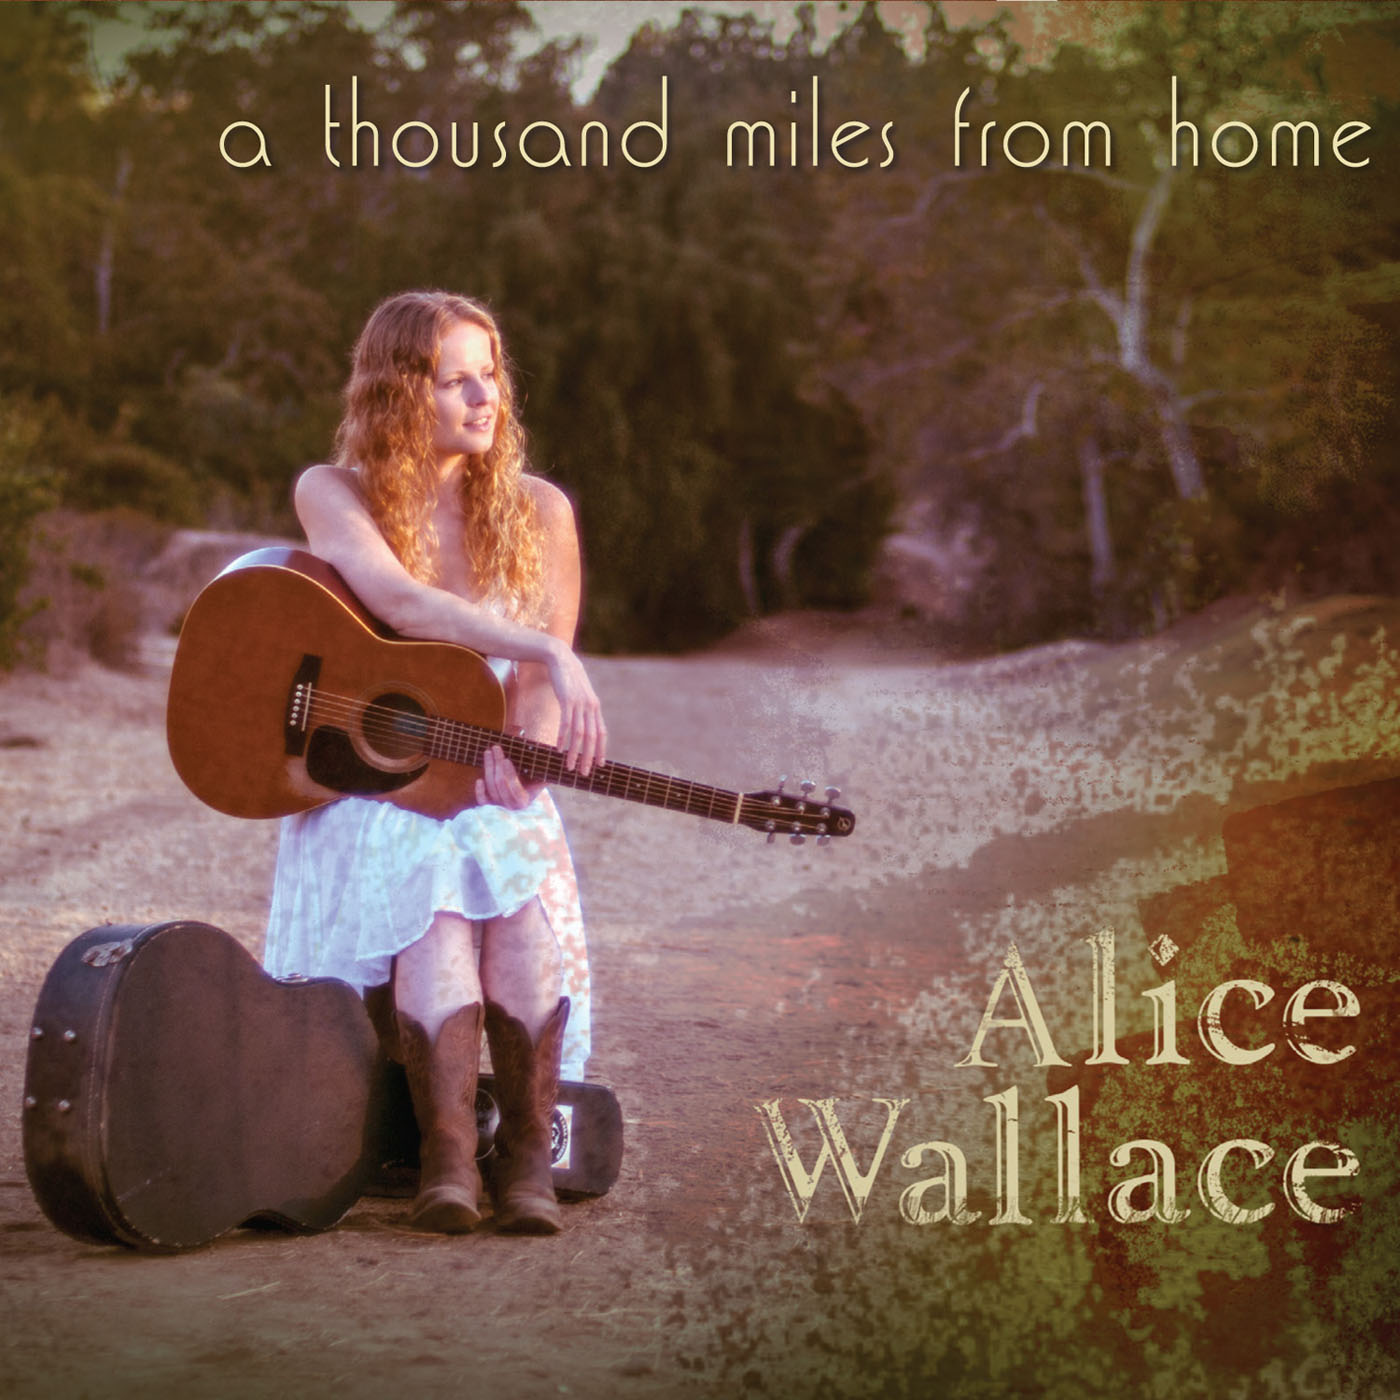 Thousand miles away. Wallace Alice. Alice песня. Ах Алиса. Ах Алиса песня.